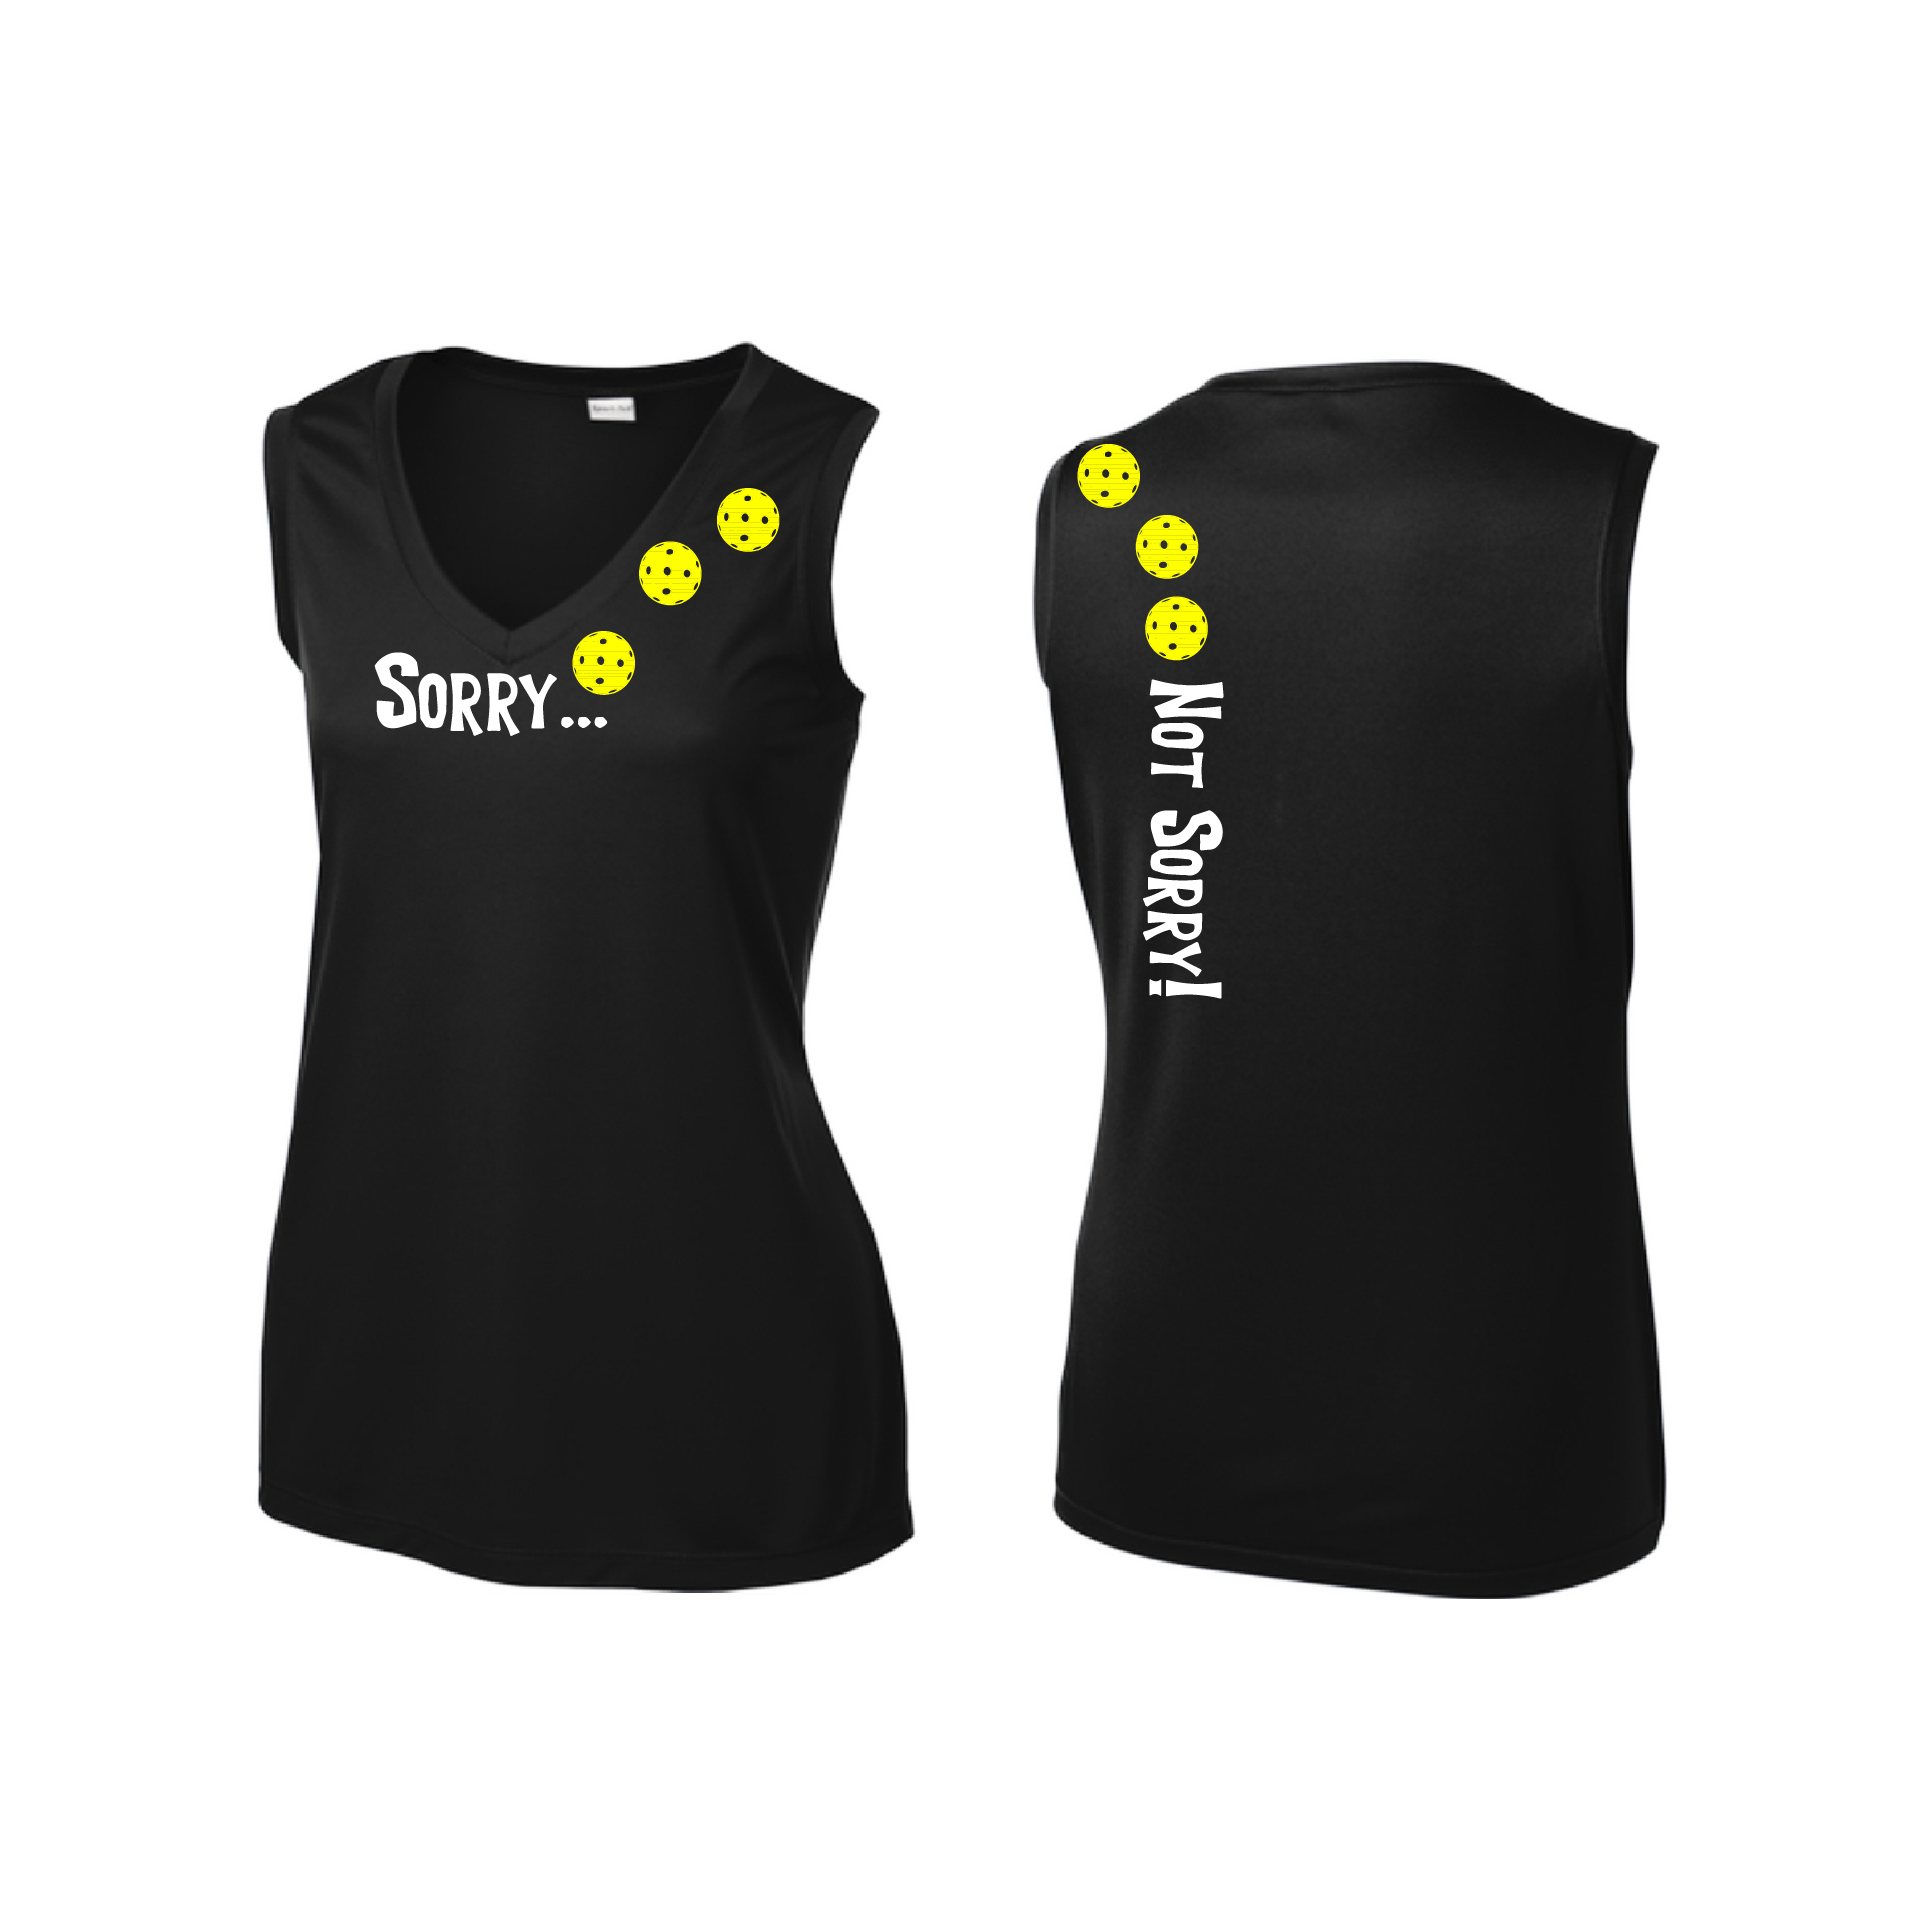 Pickleball Design: Sorry...Not Sorry with Customizable Ball Color – White, Green, Yellow or Pink Balls.   Women's Styles: Sleeveless Tank Turn up the volume in this Women's shirt with its perfect mix of softness and attitude. Material is ultra-comfortable with moisture wicking properties and tri-blend softness. PosiCharge technology locks in color. Highly breathable and lightweight.